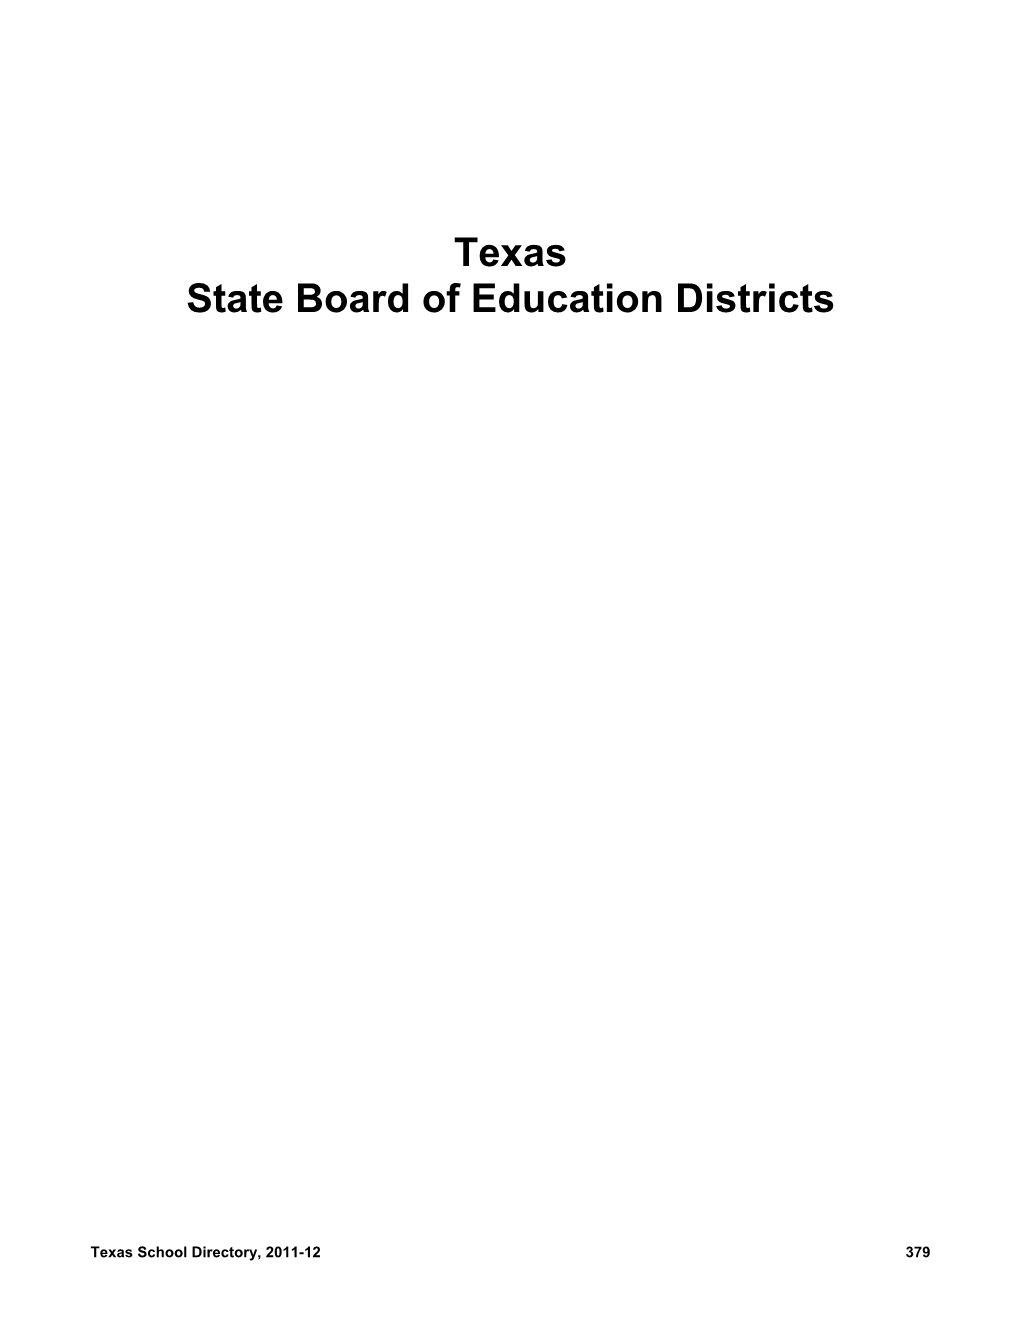 Texas State Board of Education Districts